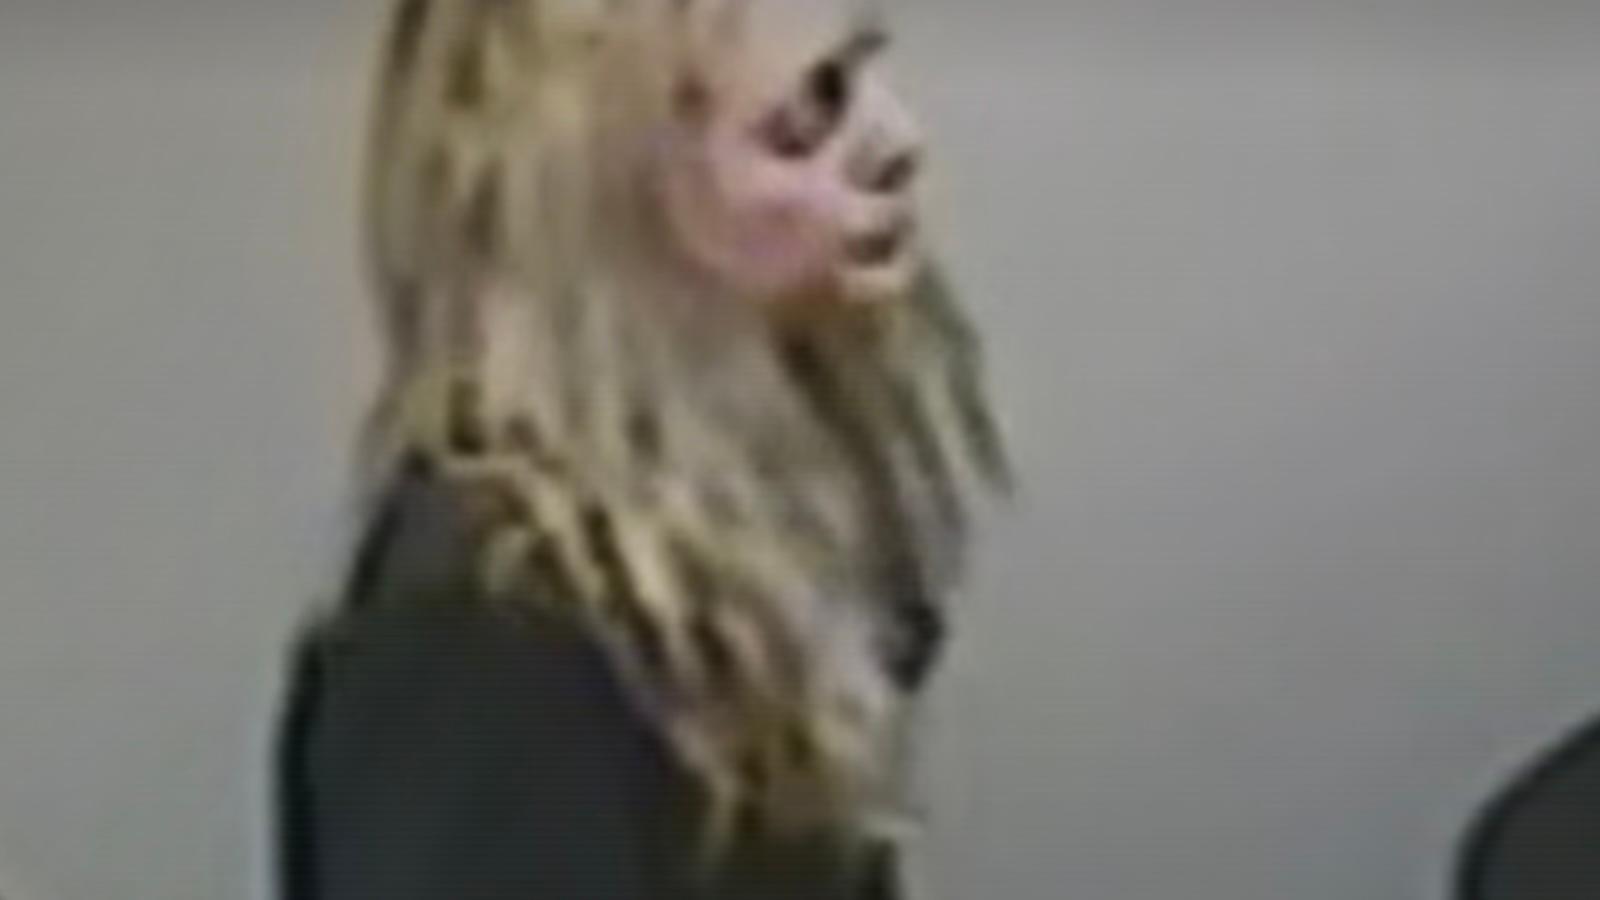 Police footage of Andrea Roberts, as shown in American Nightmare